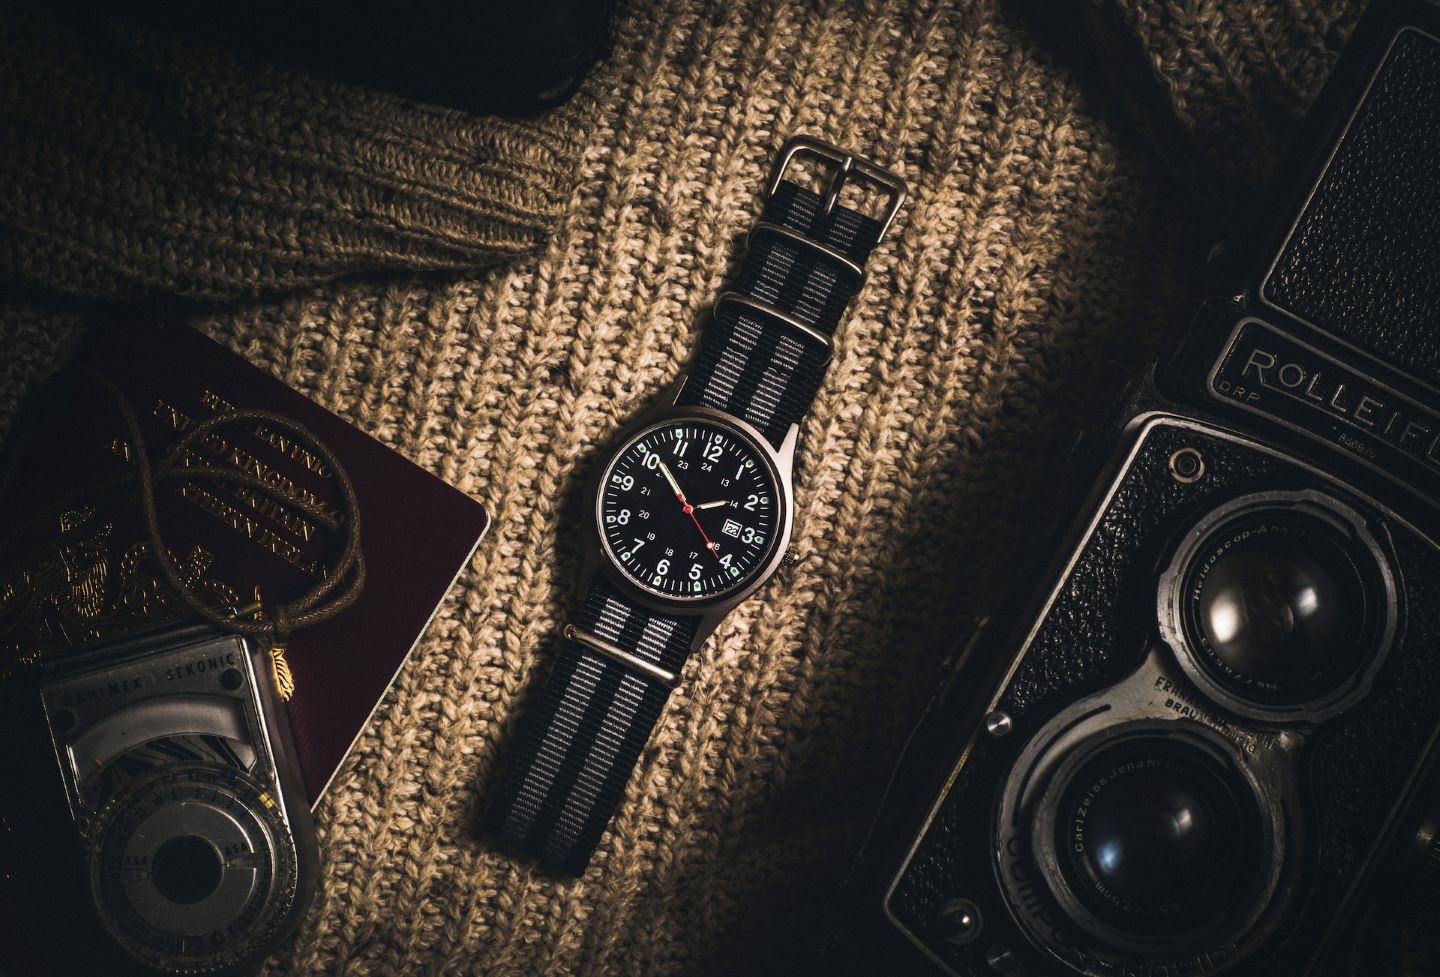 A black watch sitting amongst black, vintage items on a woven surface